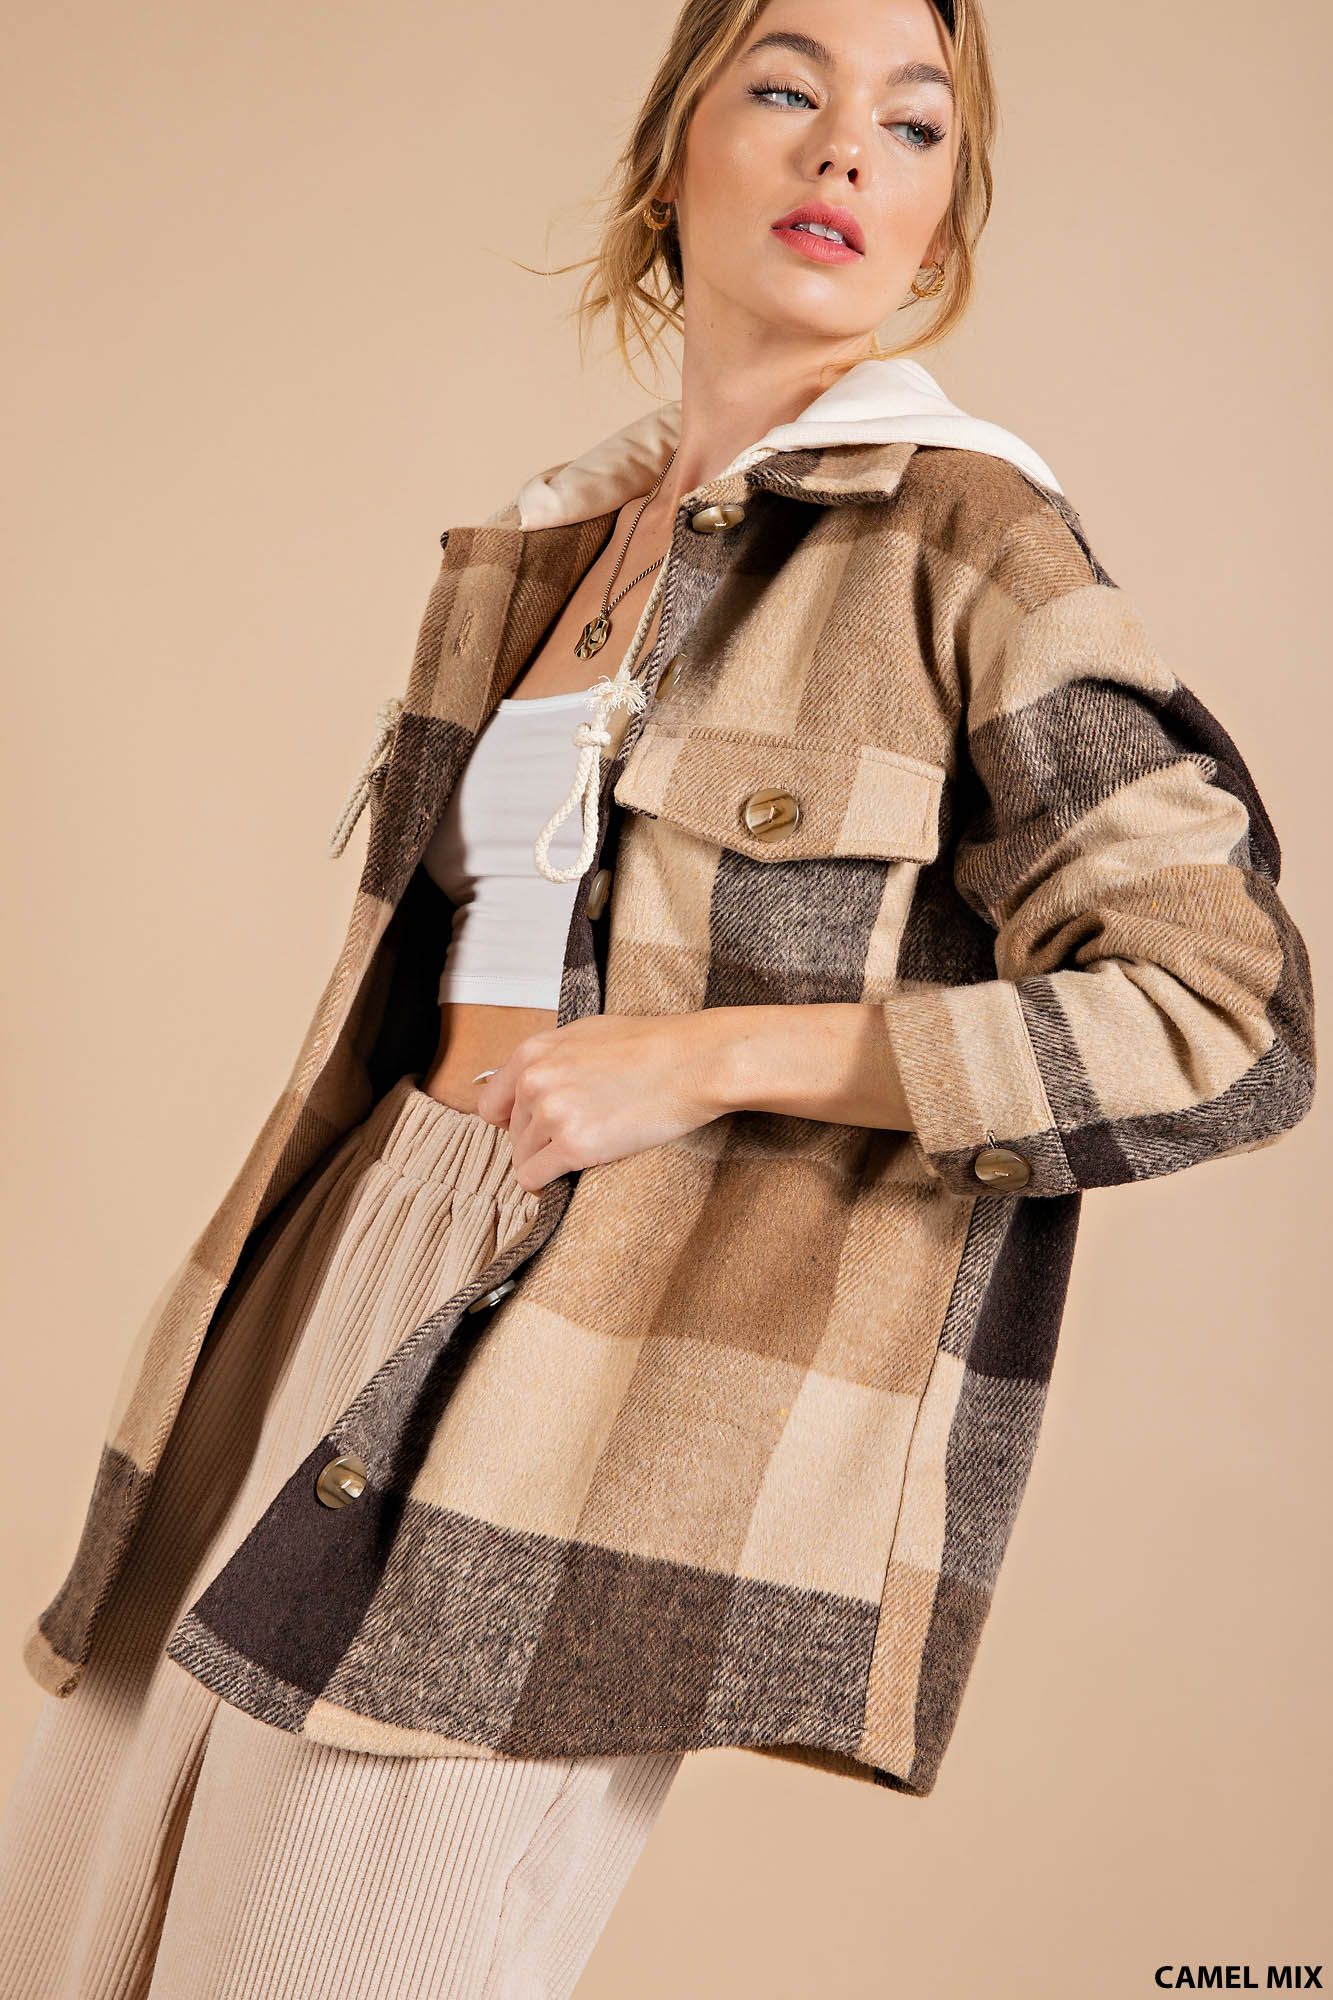 Hooded Plaid shirt jacket (shacket) RESTOCKED! NEW COLOR!  Ivy and Pearl Boutique   